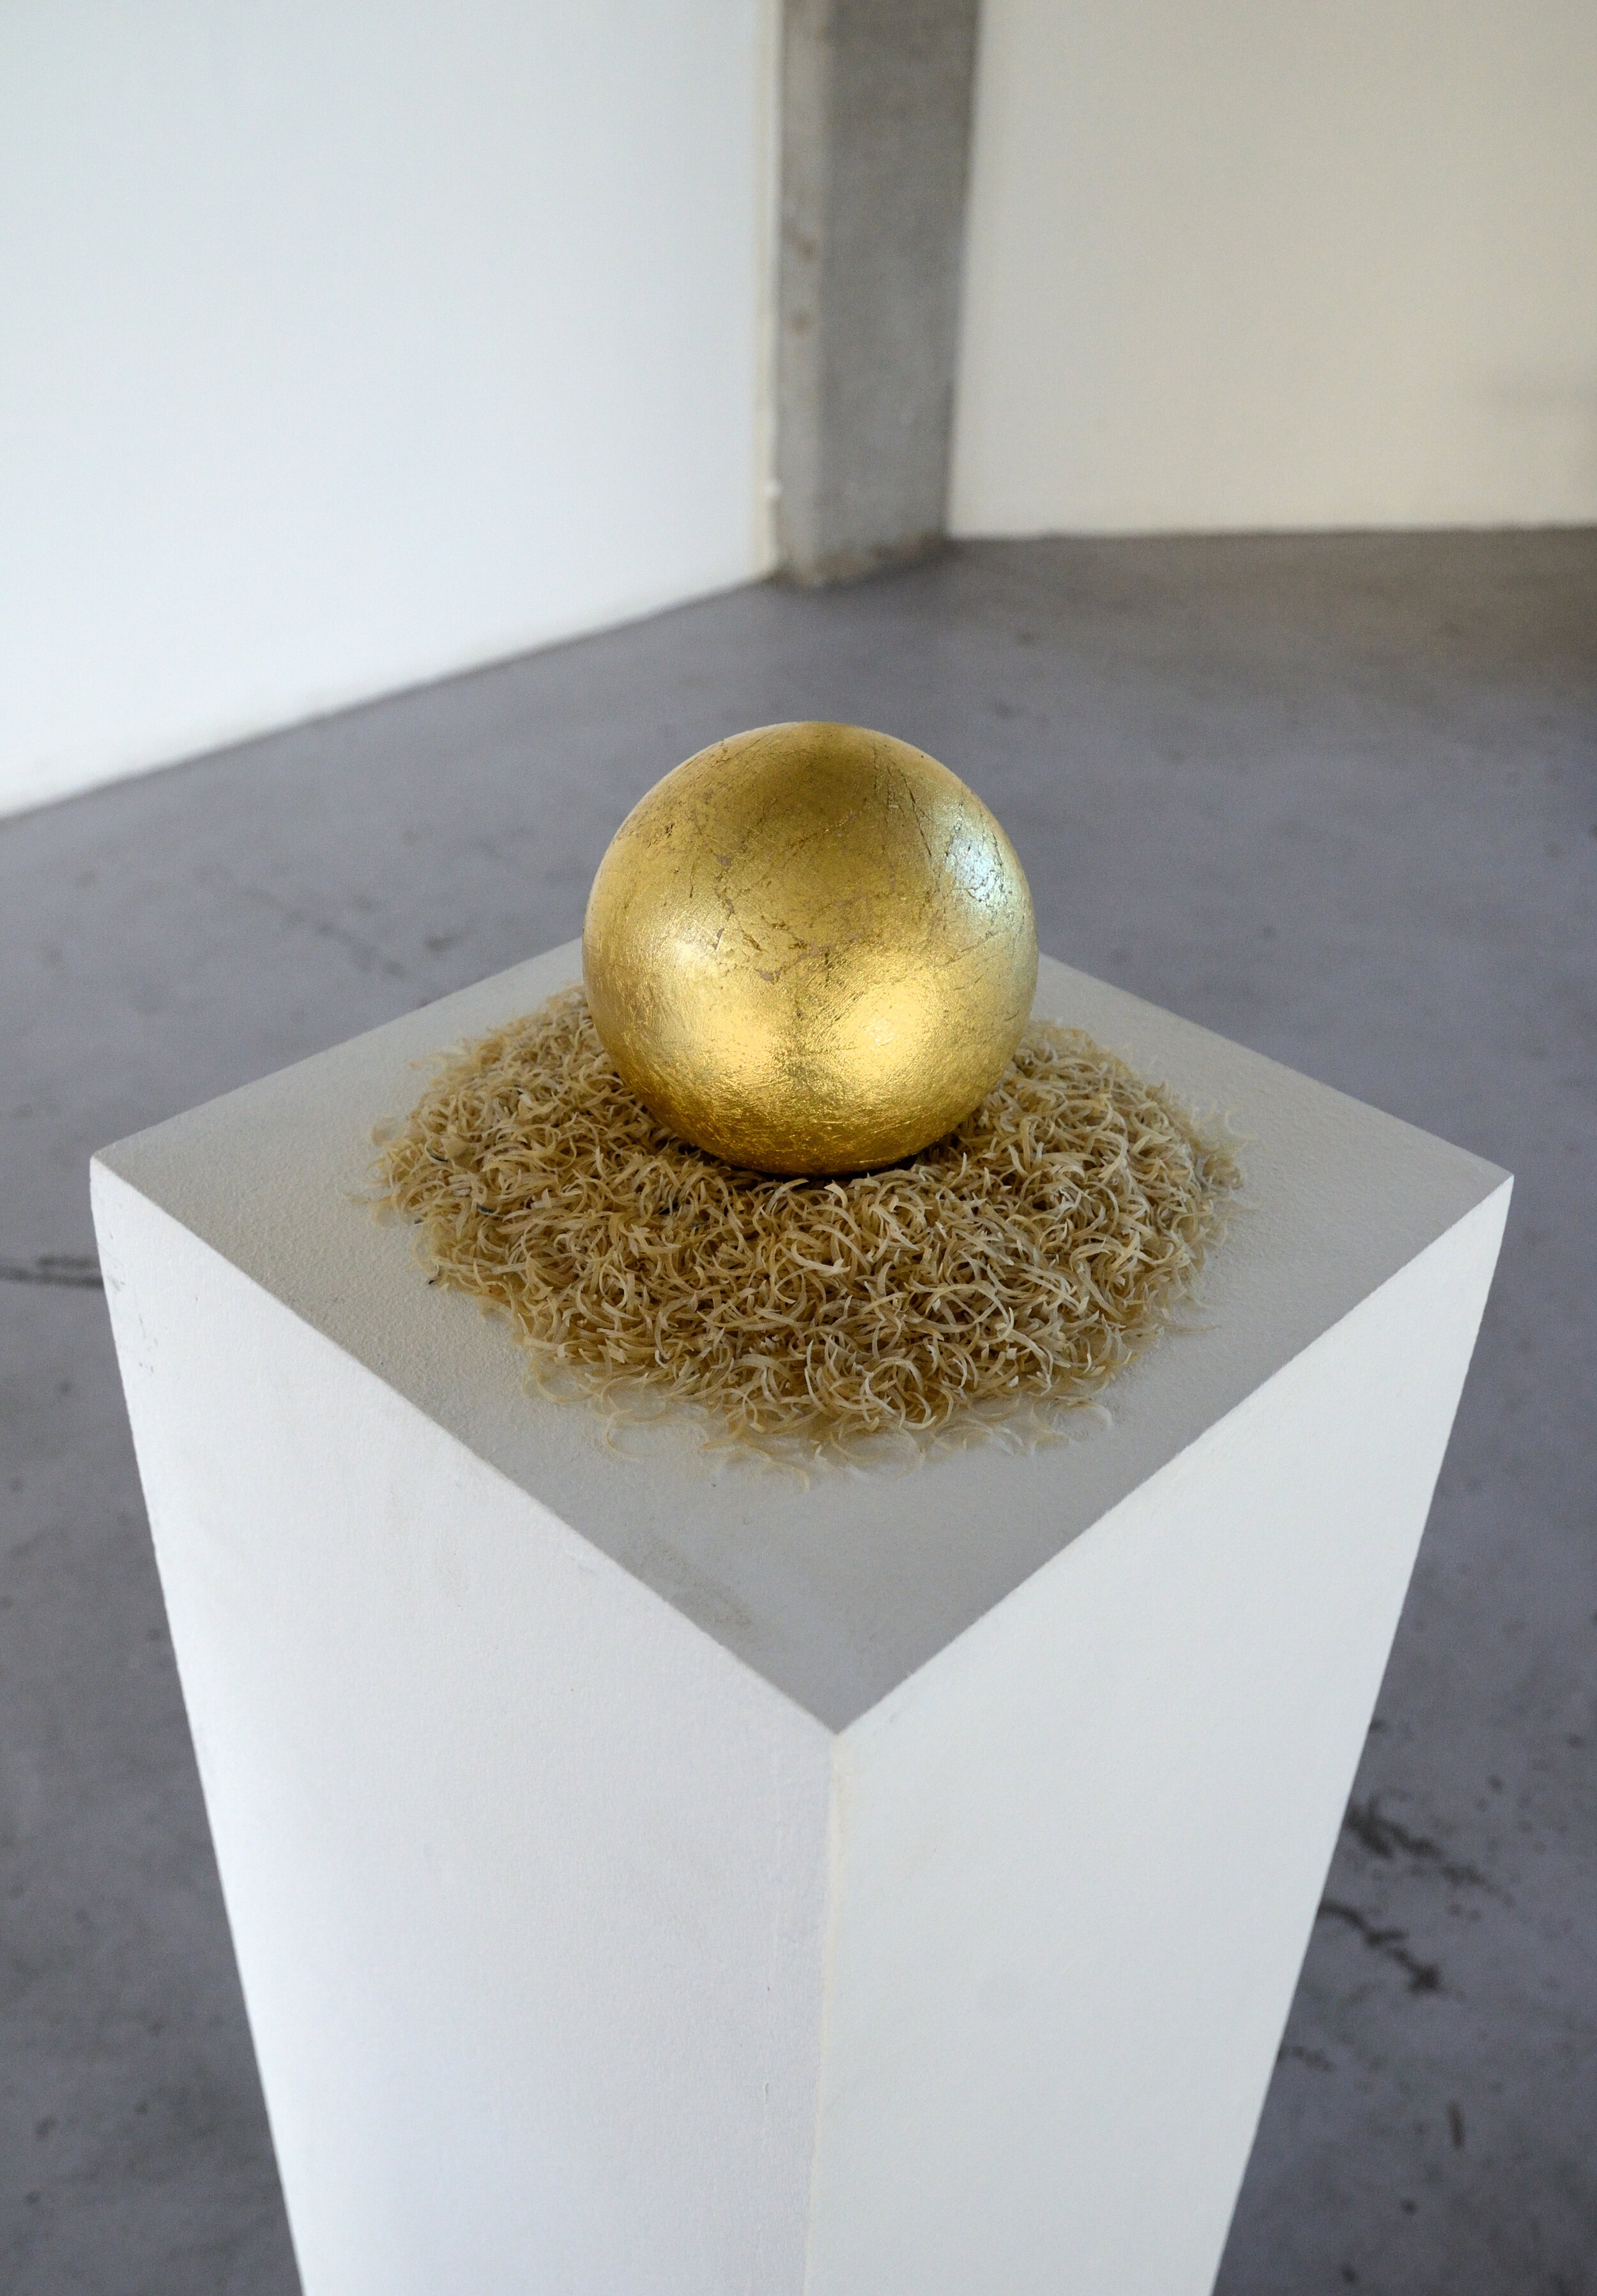 A Symbol for the Mind, a gilded sphere on a bed of clipped fingernails, ca. 25x25cm